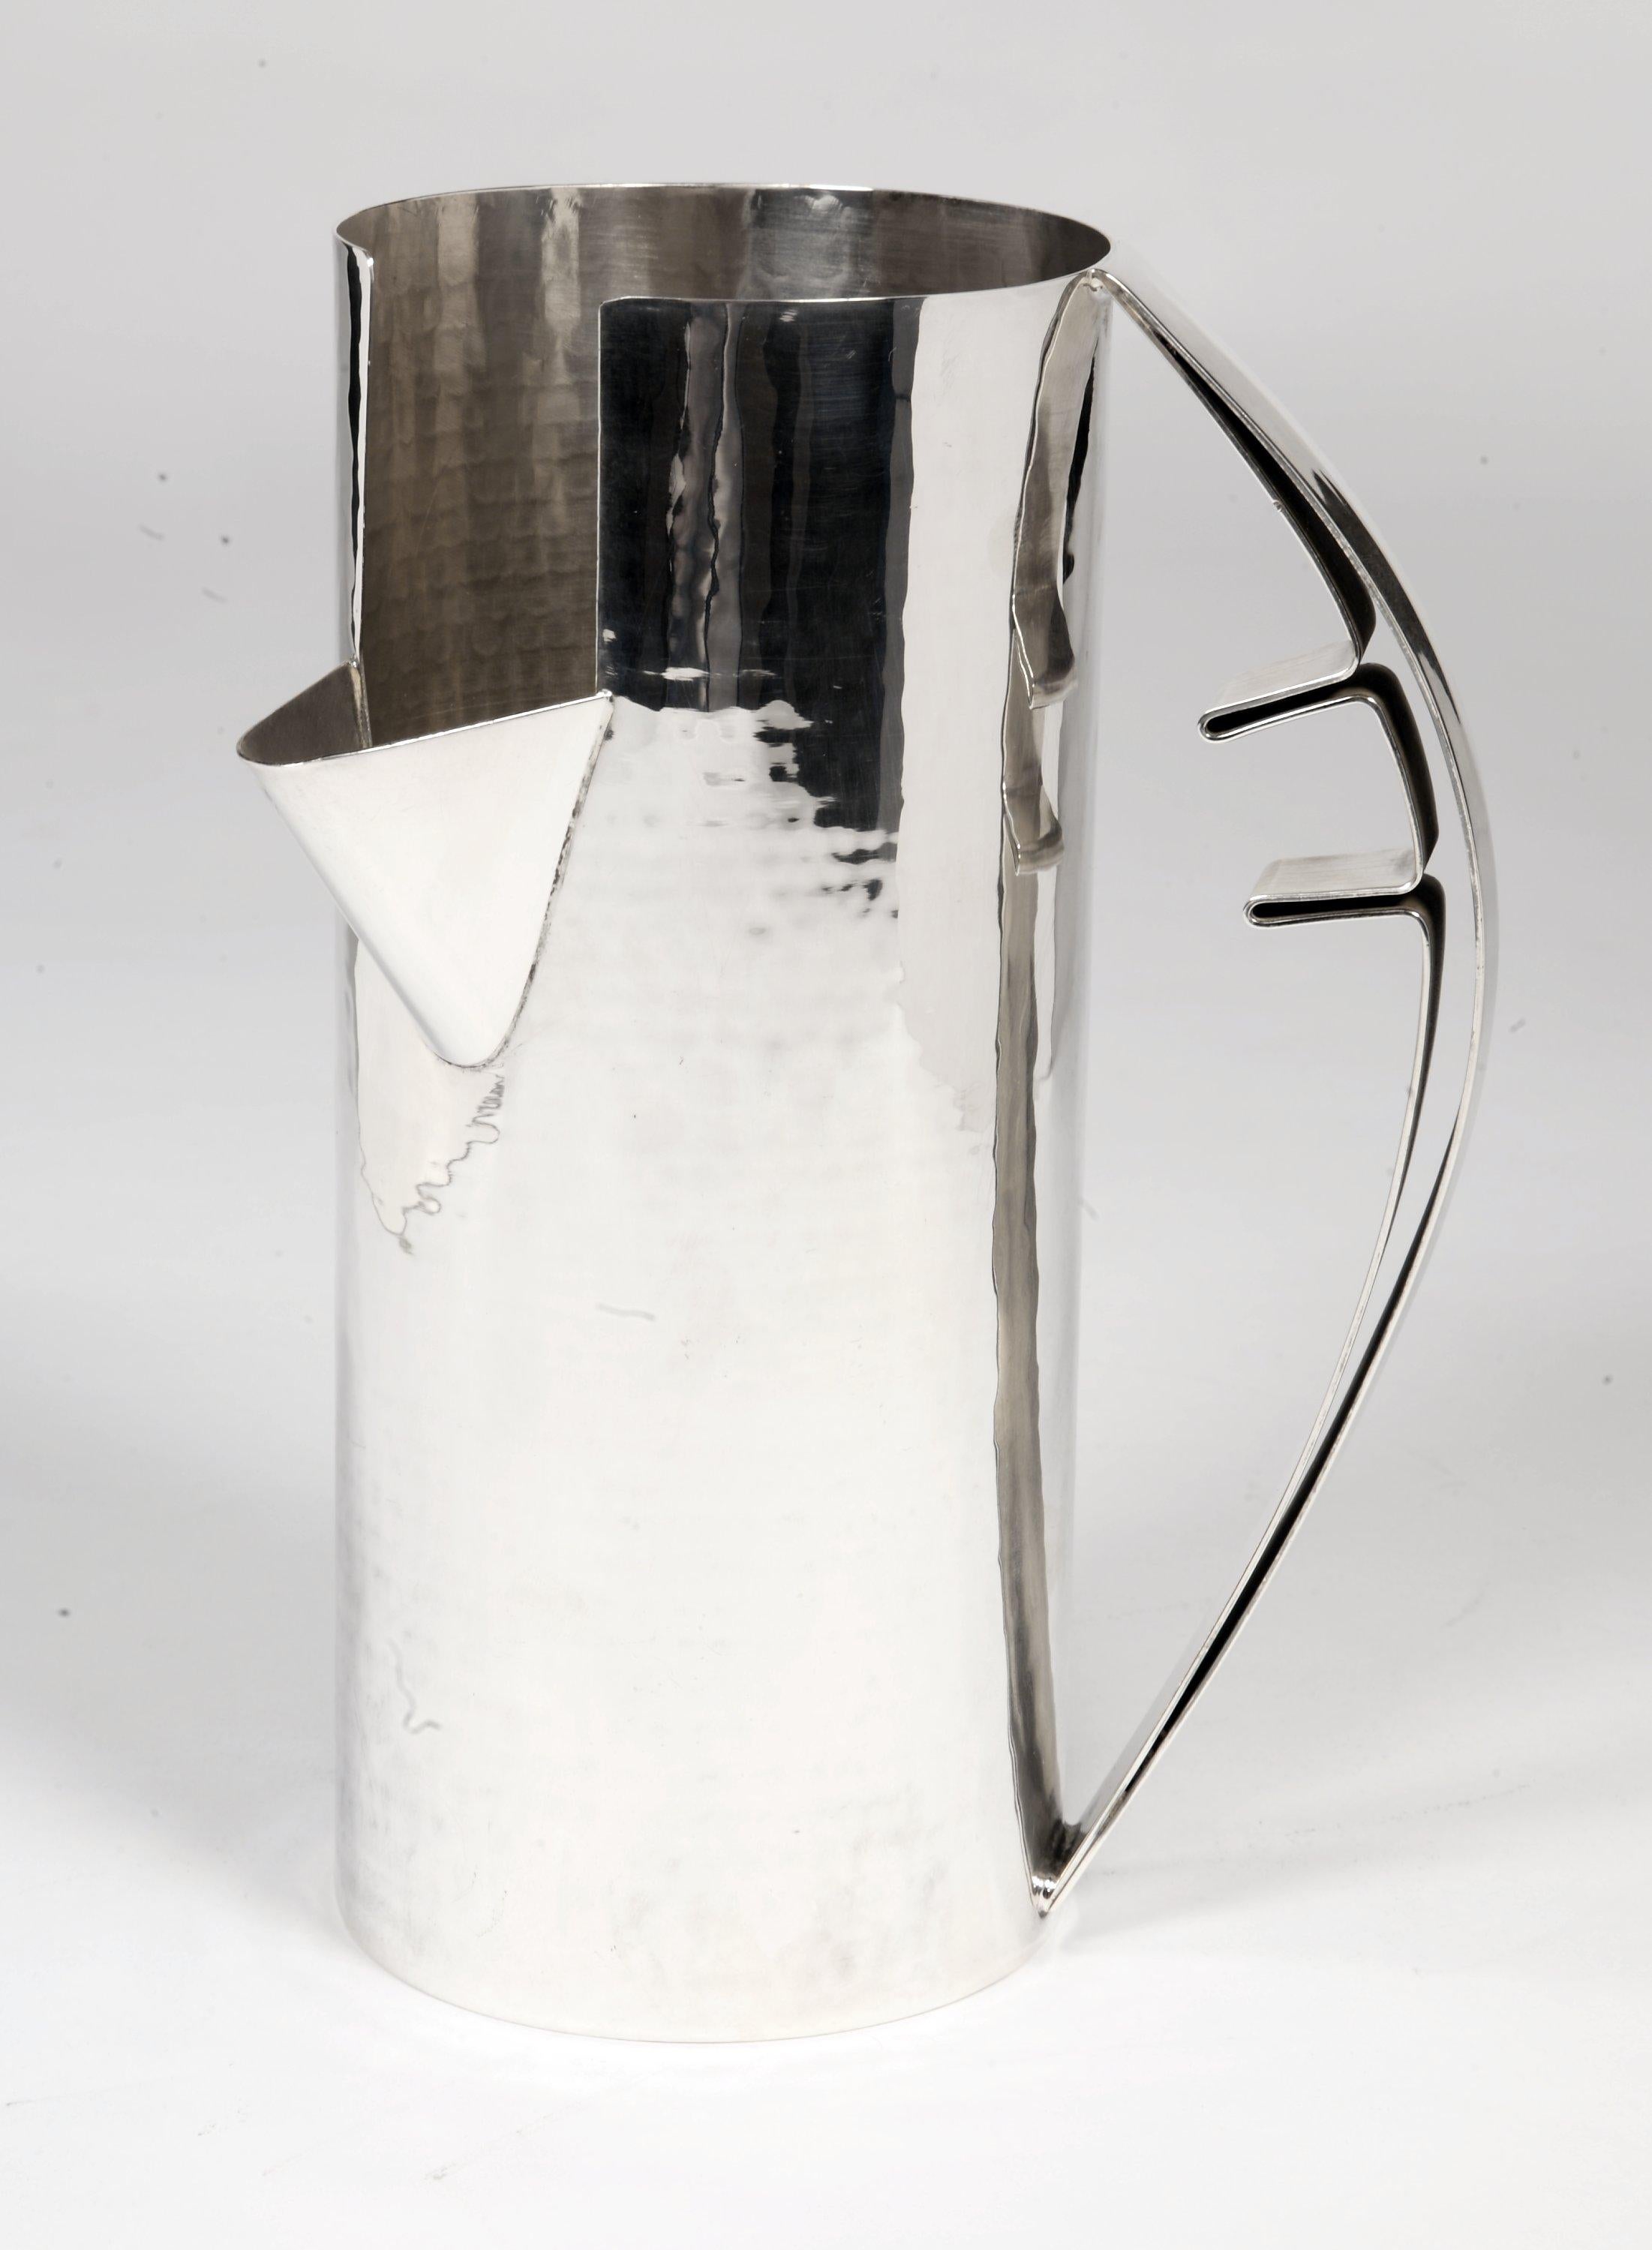 Pitcher in hammered solid silver formed of a handle in an arc of a circle and a pouring spout located at 3/4 of the body.

Dimensions: 22 x 10cm
Weight: 584g
Material: Sterling silver 925/°°
Hallmark: publisher's stamp, signed and numbered - Edition